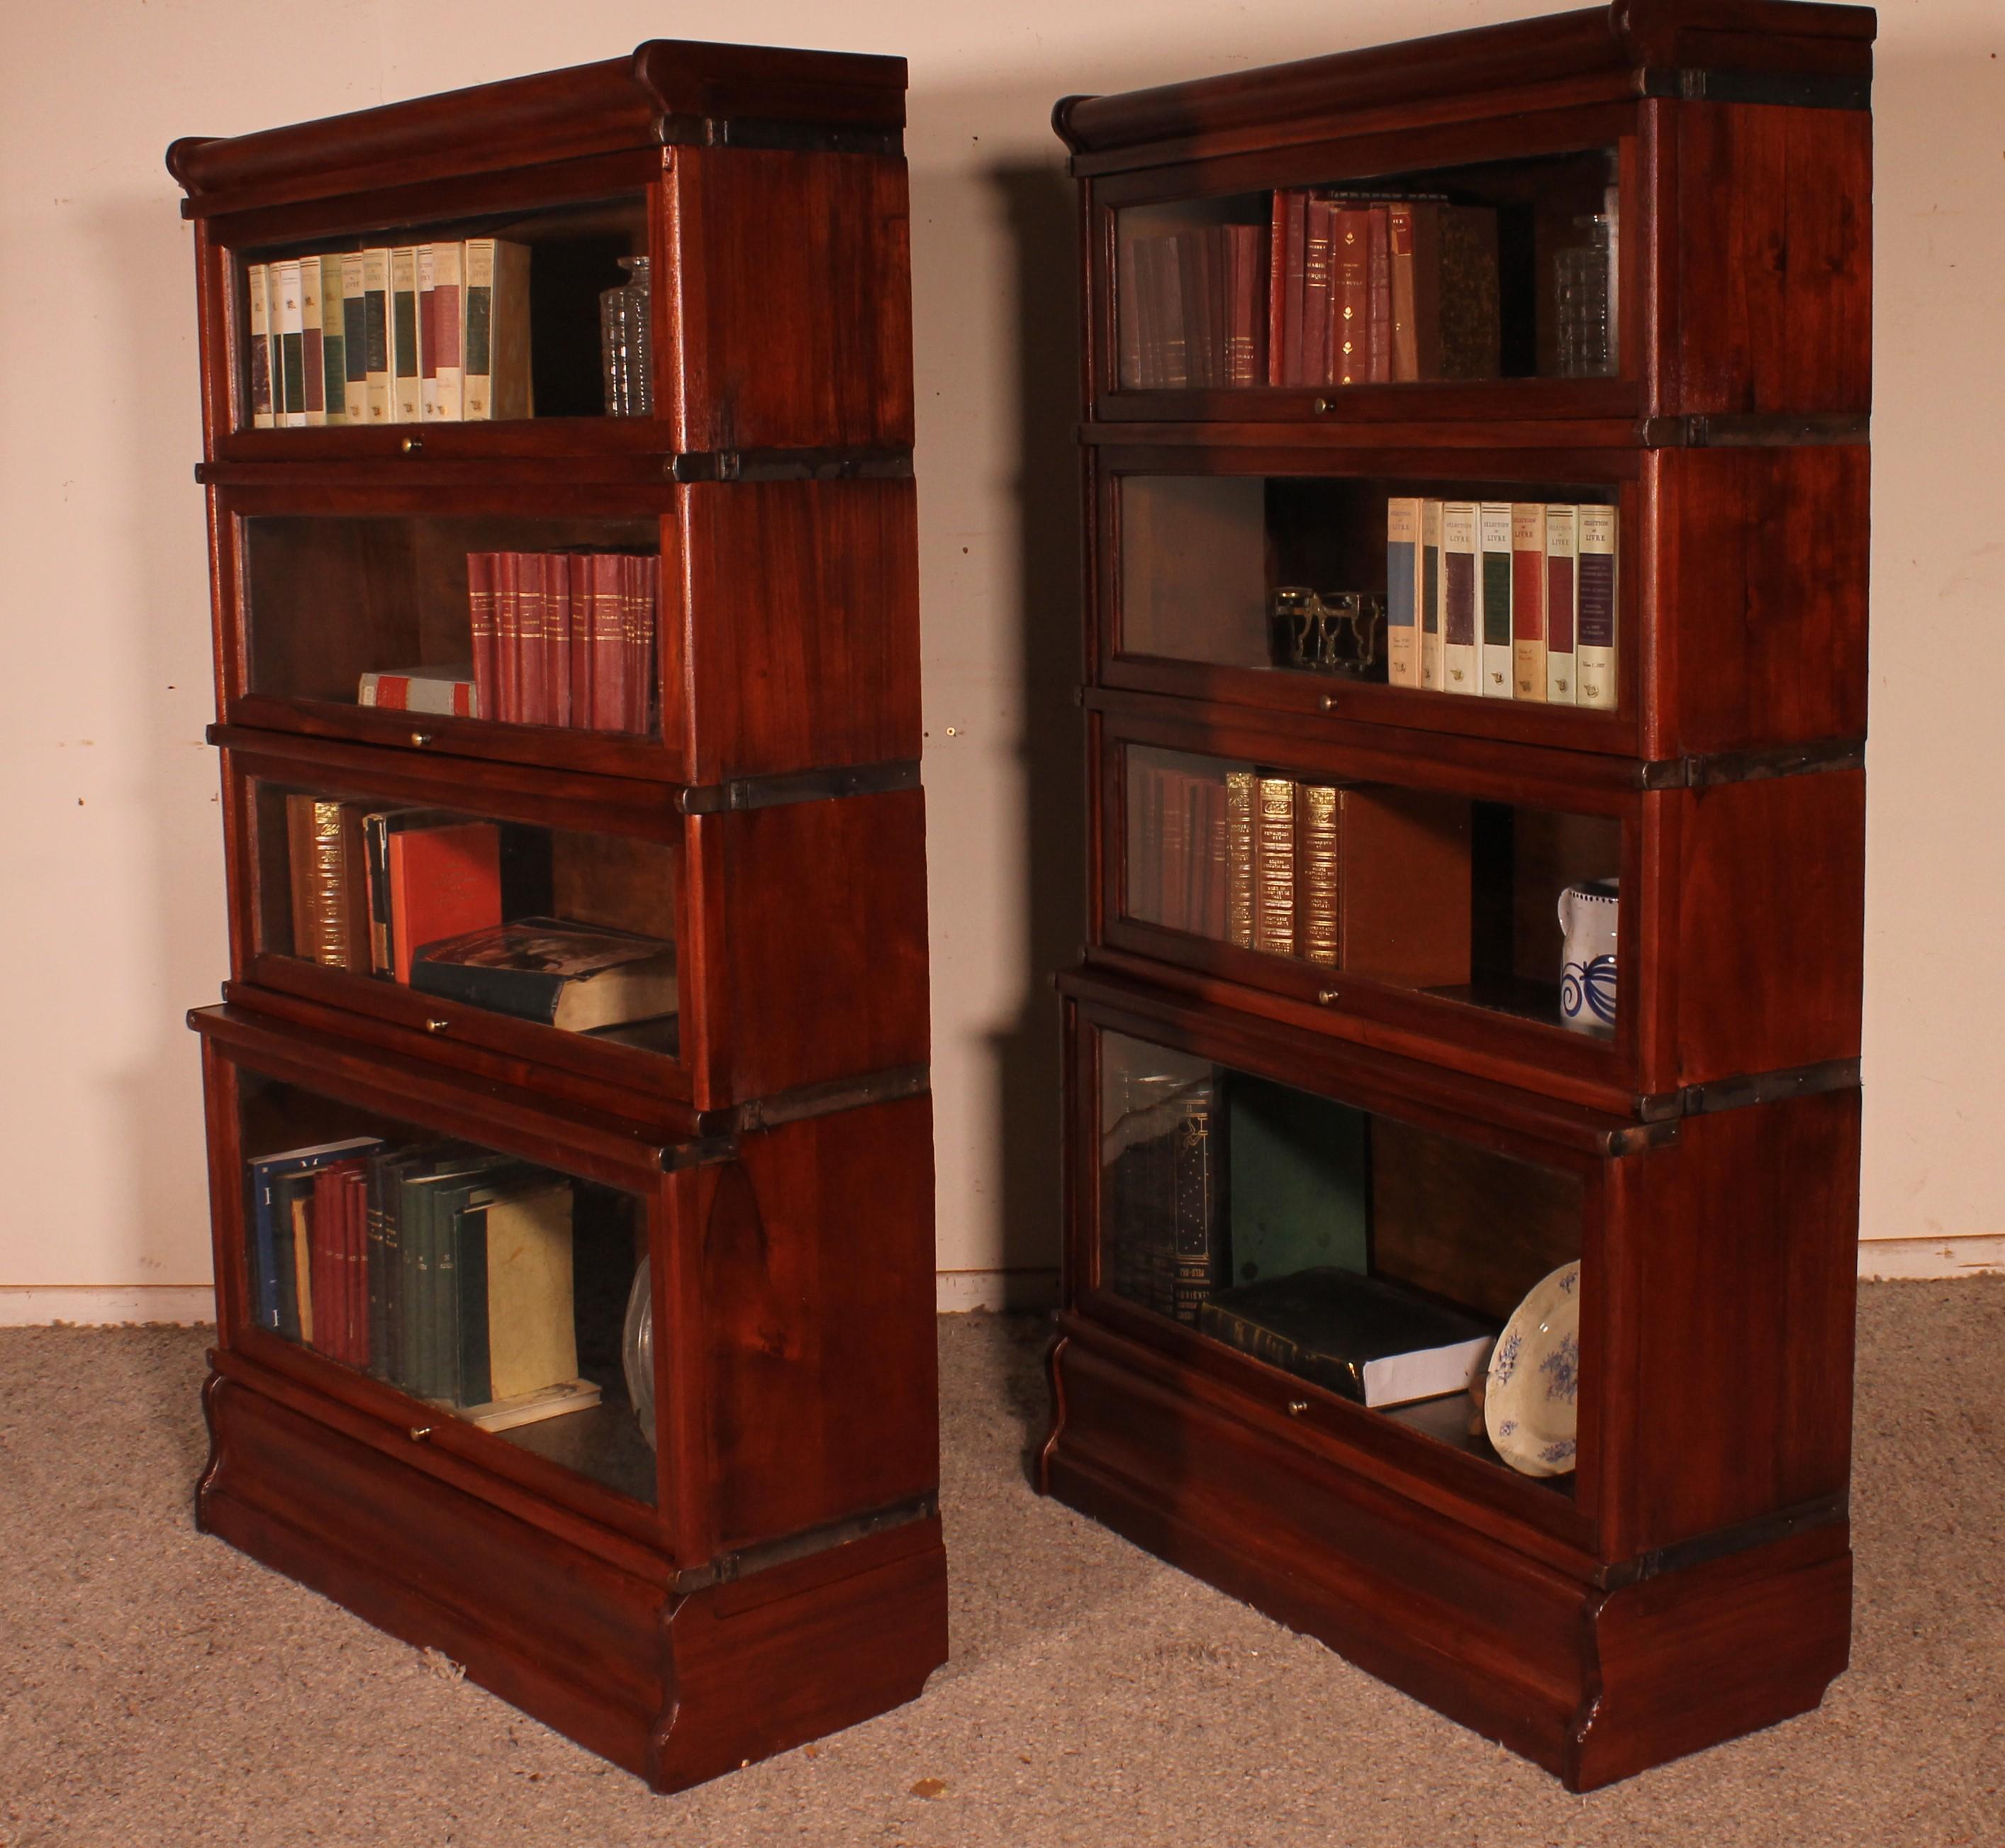 Pair of Globe Wernicke Bookcases in Mahogany, 19th Century For Sale 5